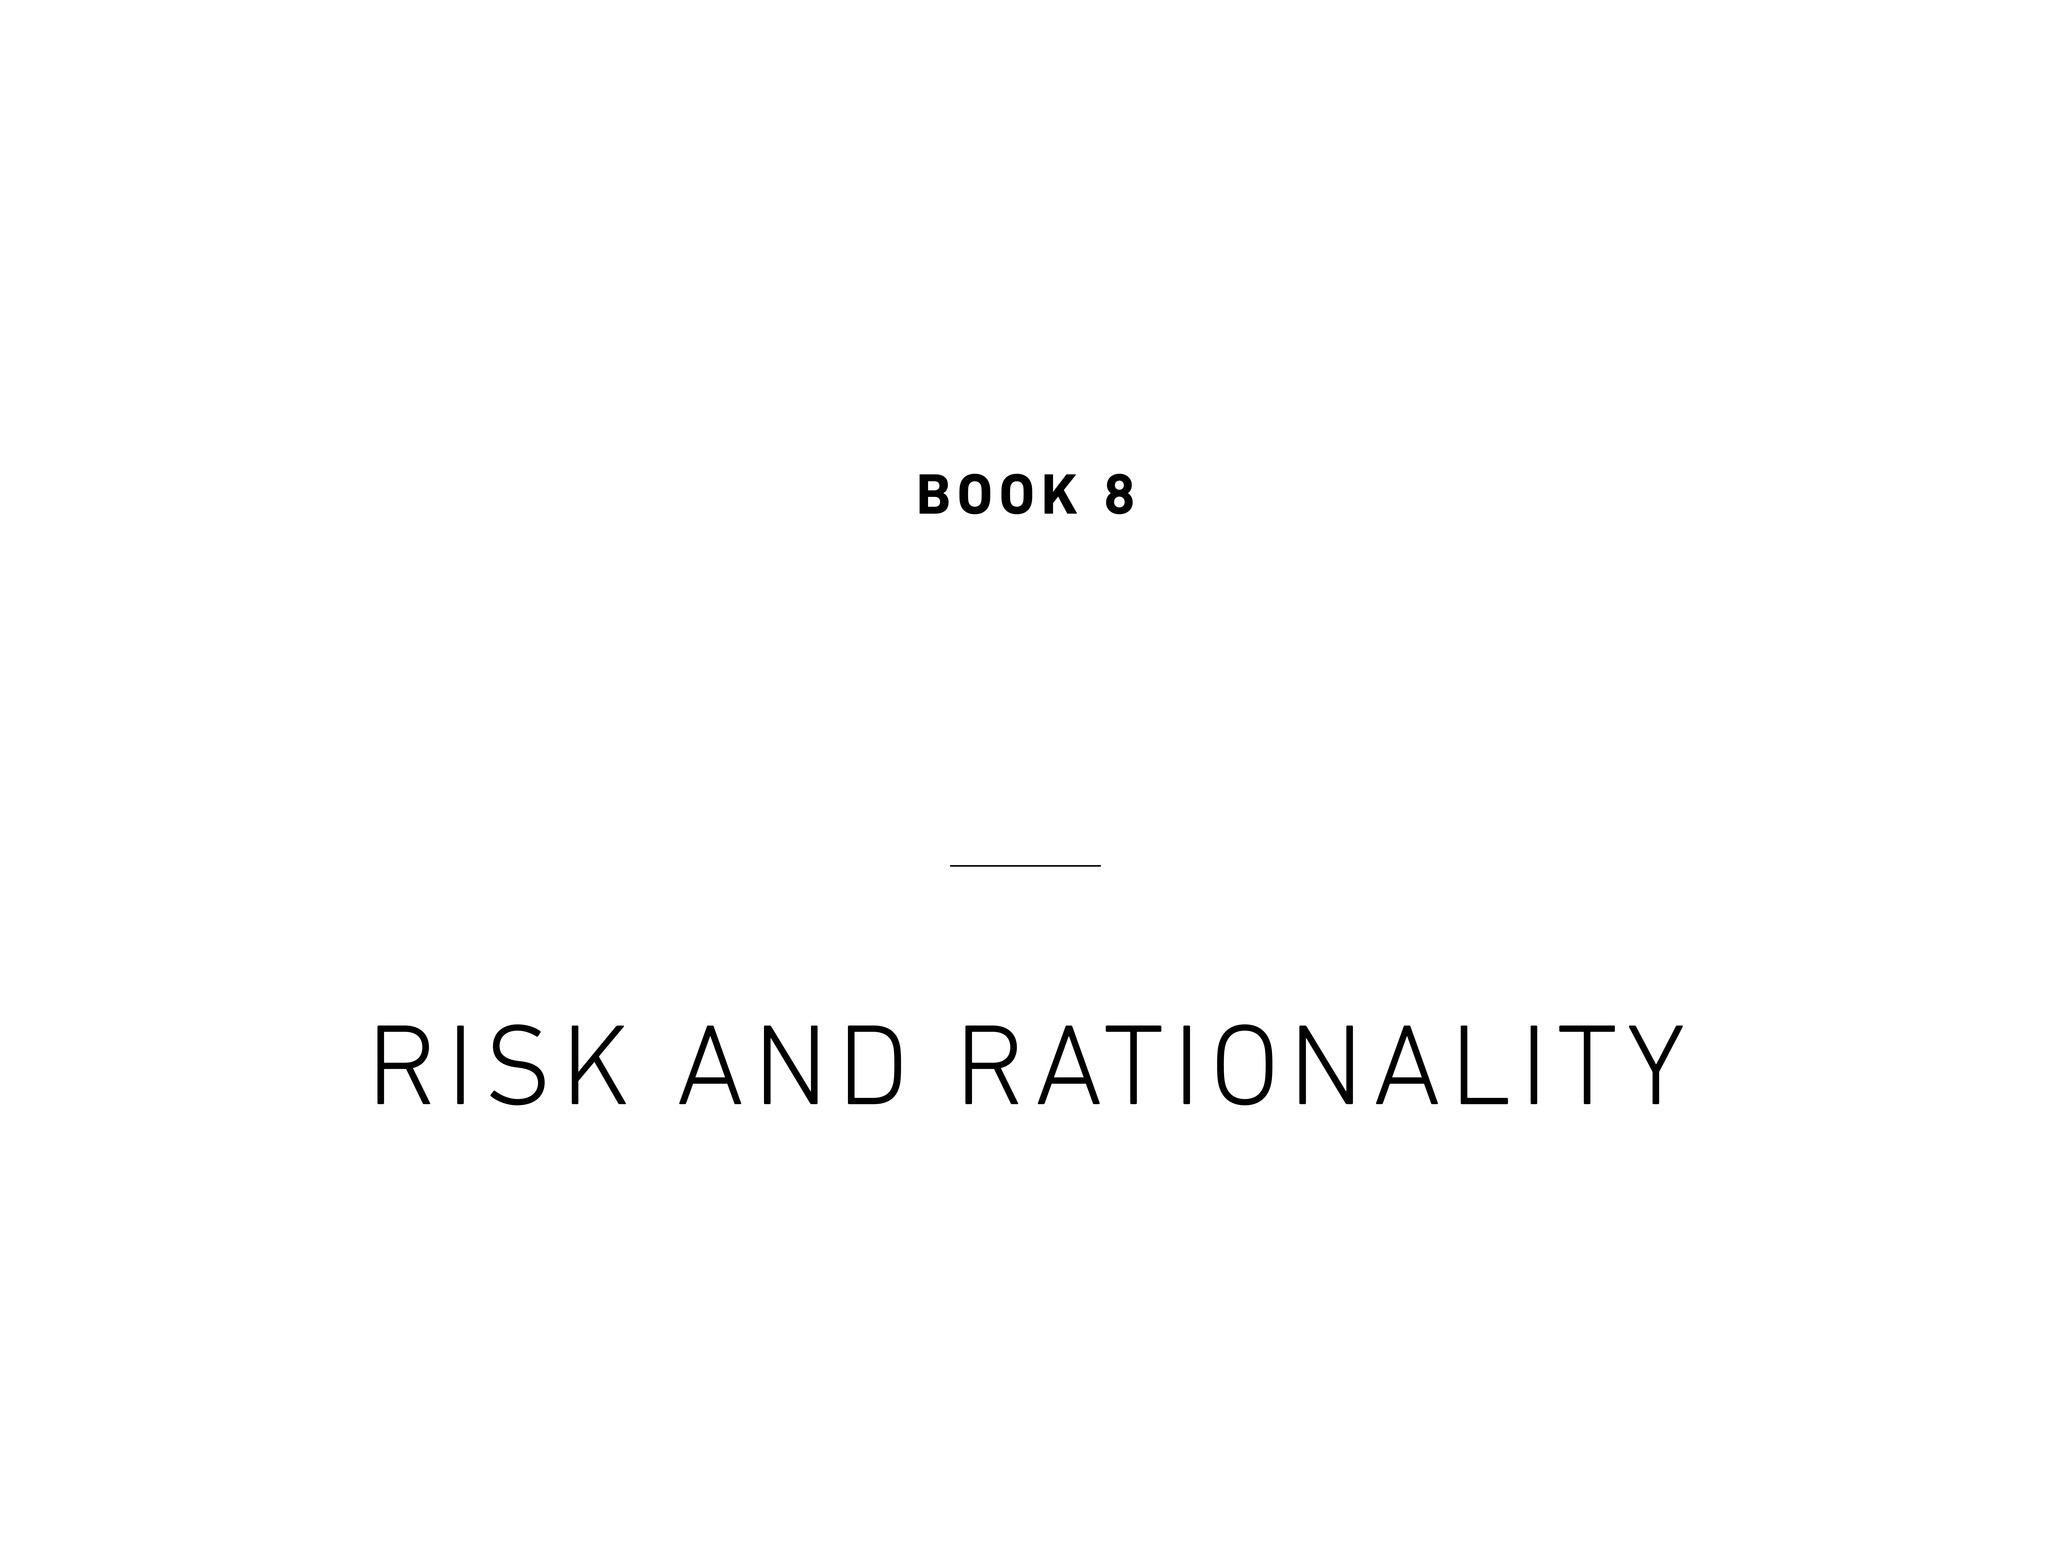 Book 8 Risk and Rationality